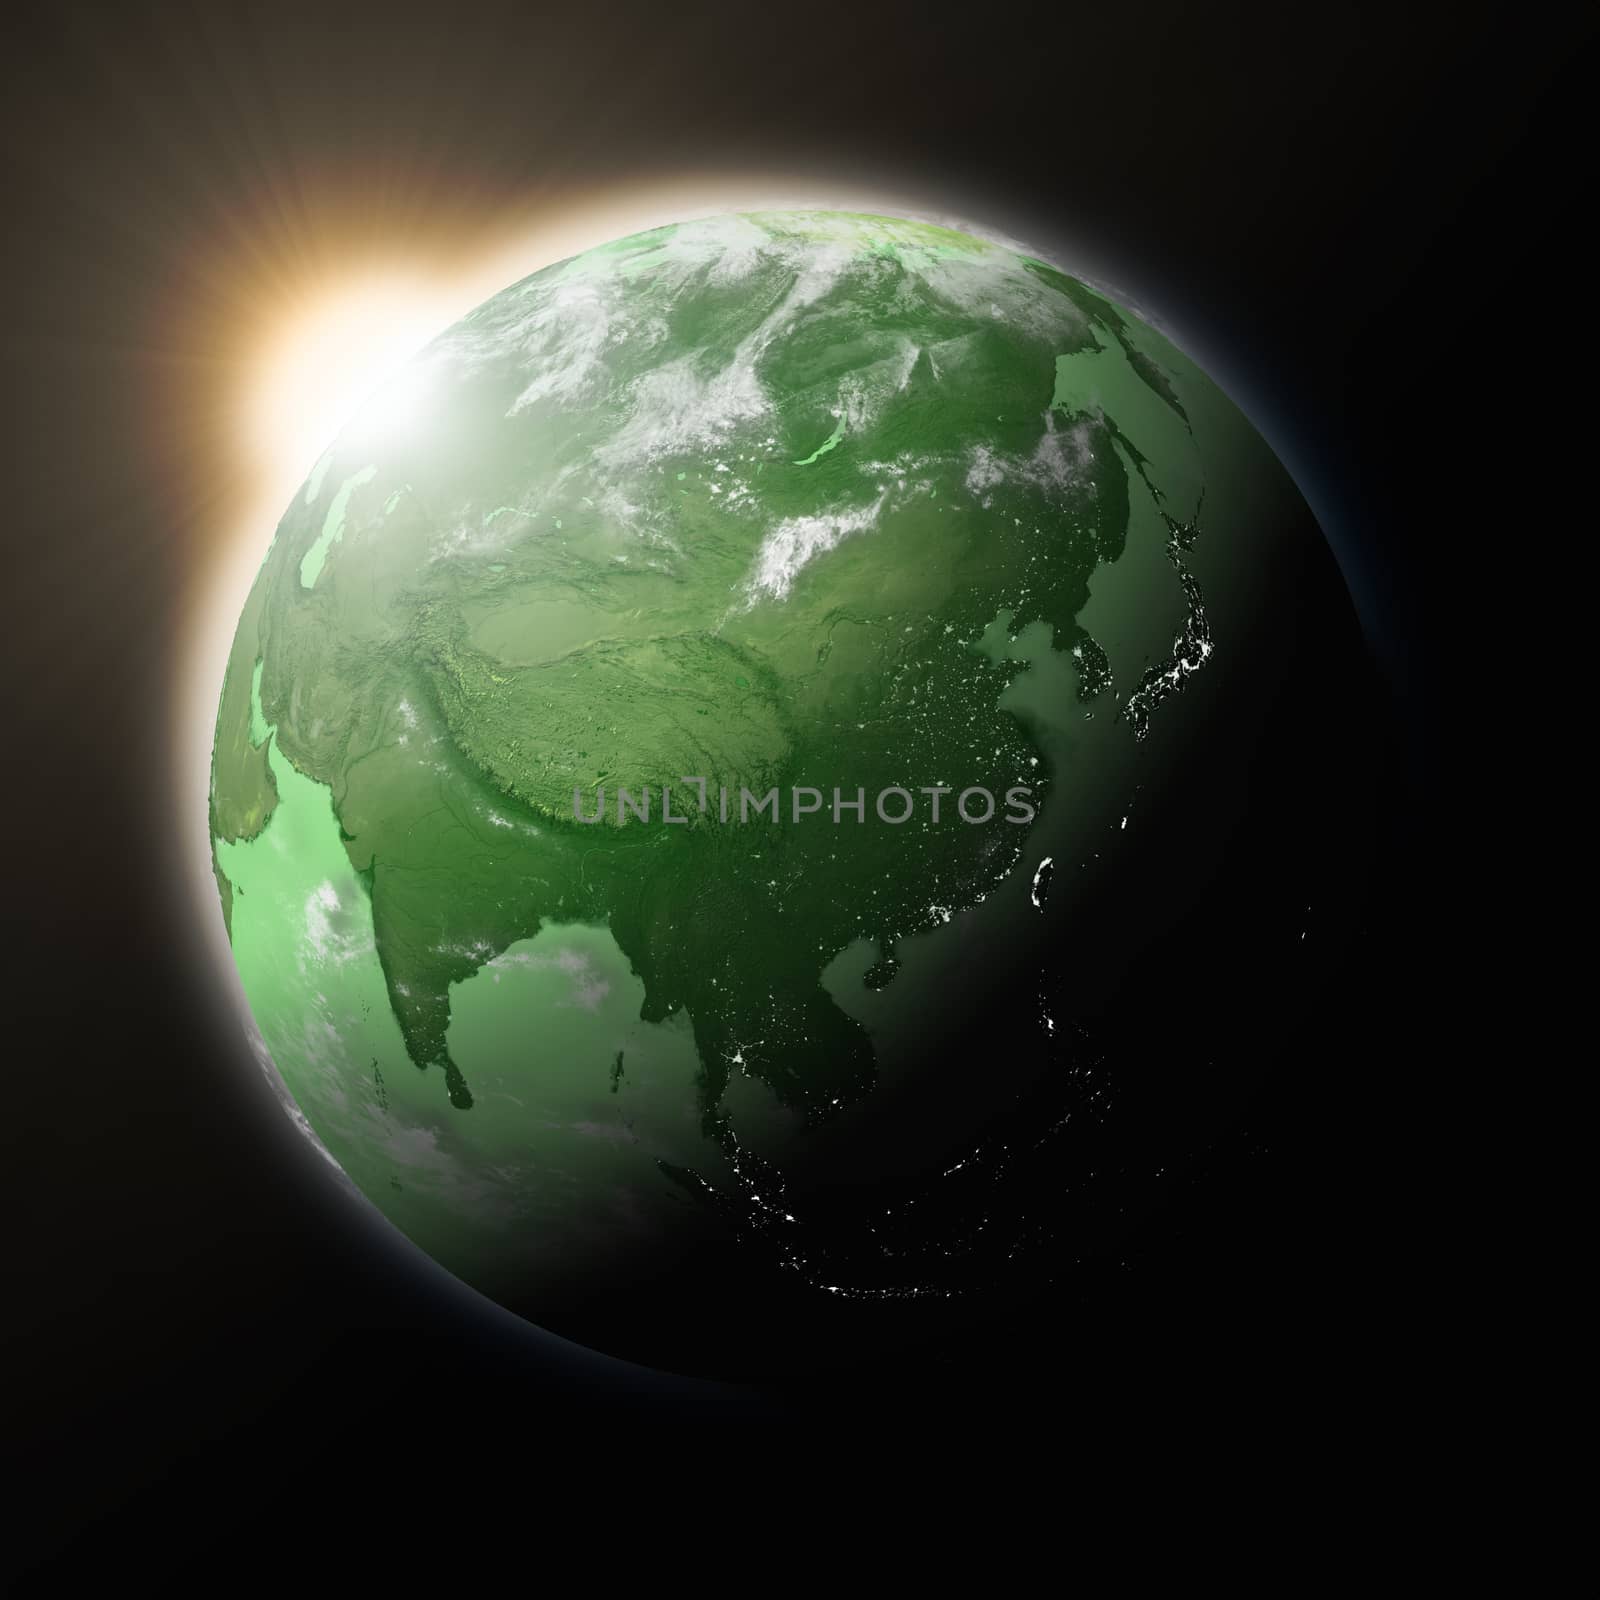 Sun over Southeast Asia on green planet Earth isolated on black background. Highly detailed planet surface. Elements of this image furnished by NASA.